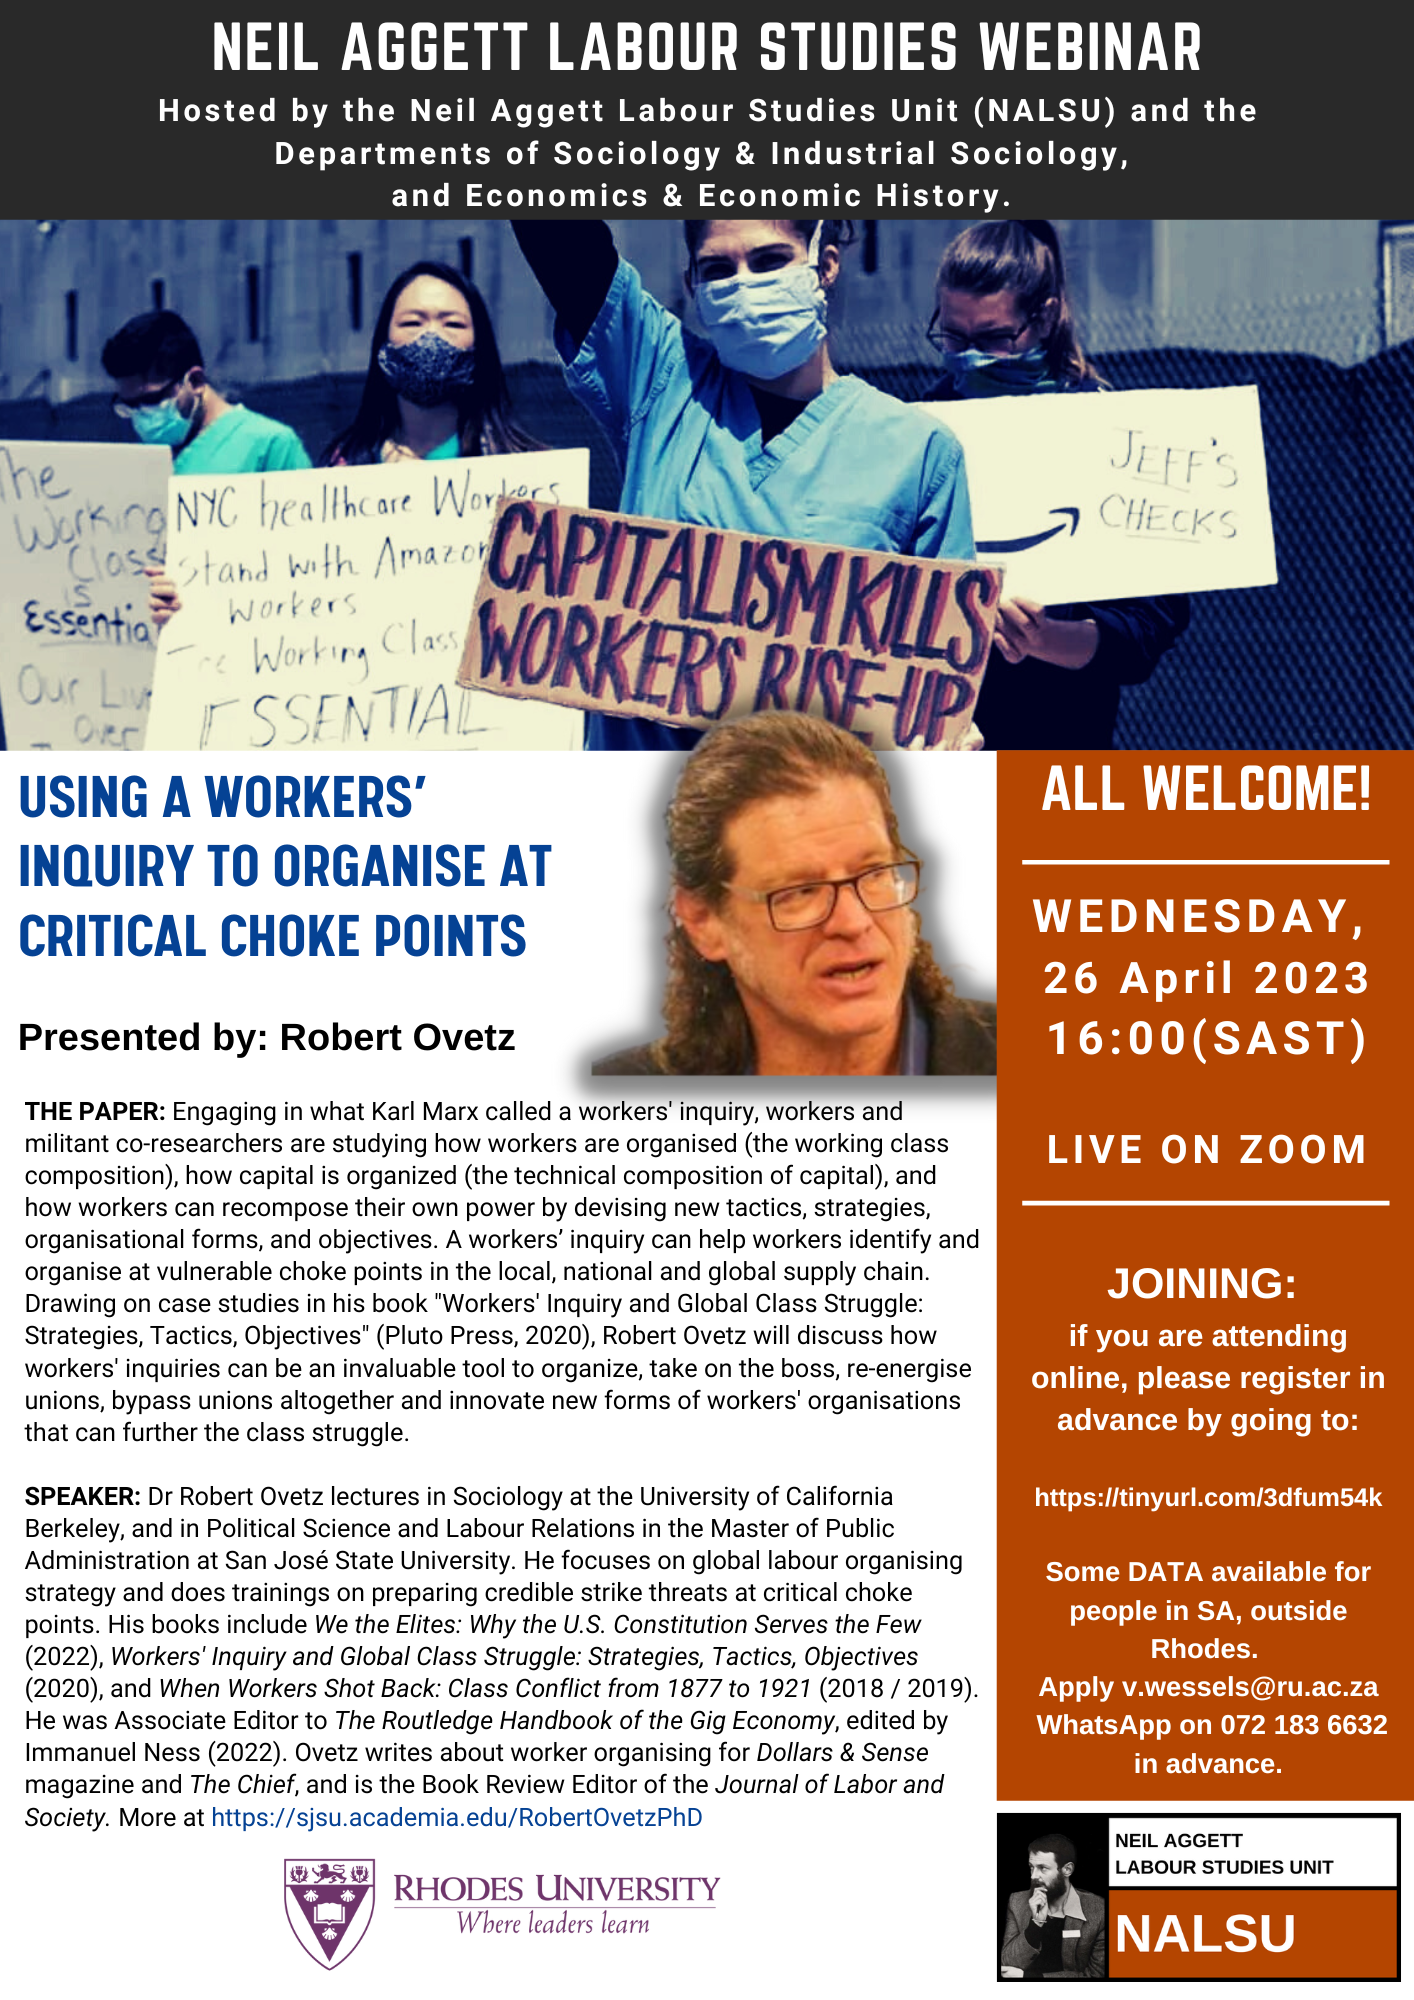 "Using a Workers' Inquiry to Organise at critical Choke Points"